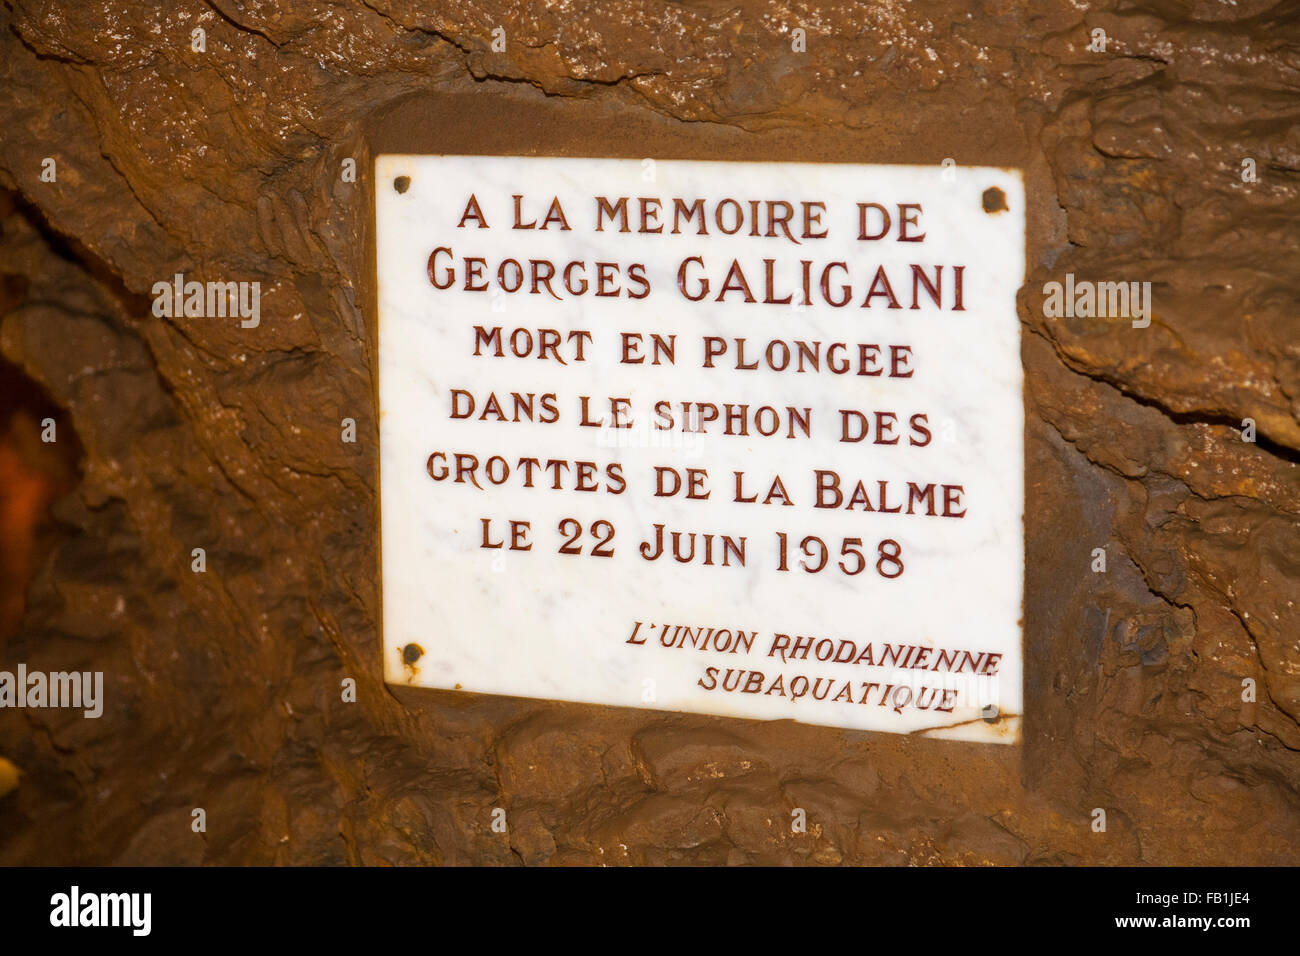 https://c8.alamy.com/comp/FB1JE4/memorial-plaque-to-a-pot-holer-diver-who-died-in-a-syphon-in-caves-FB1JE4.jpg